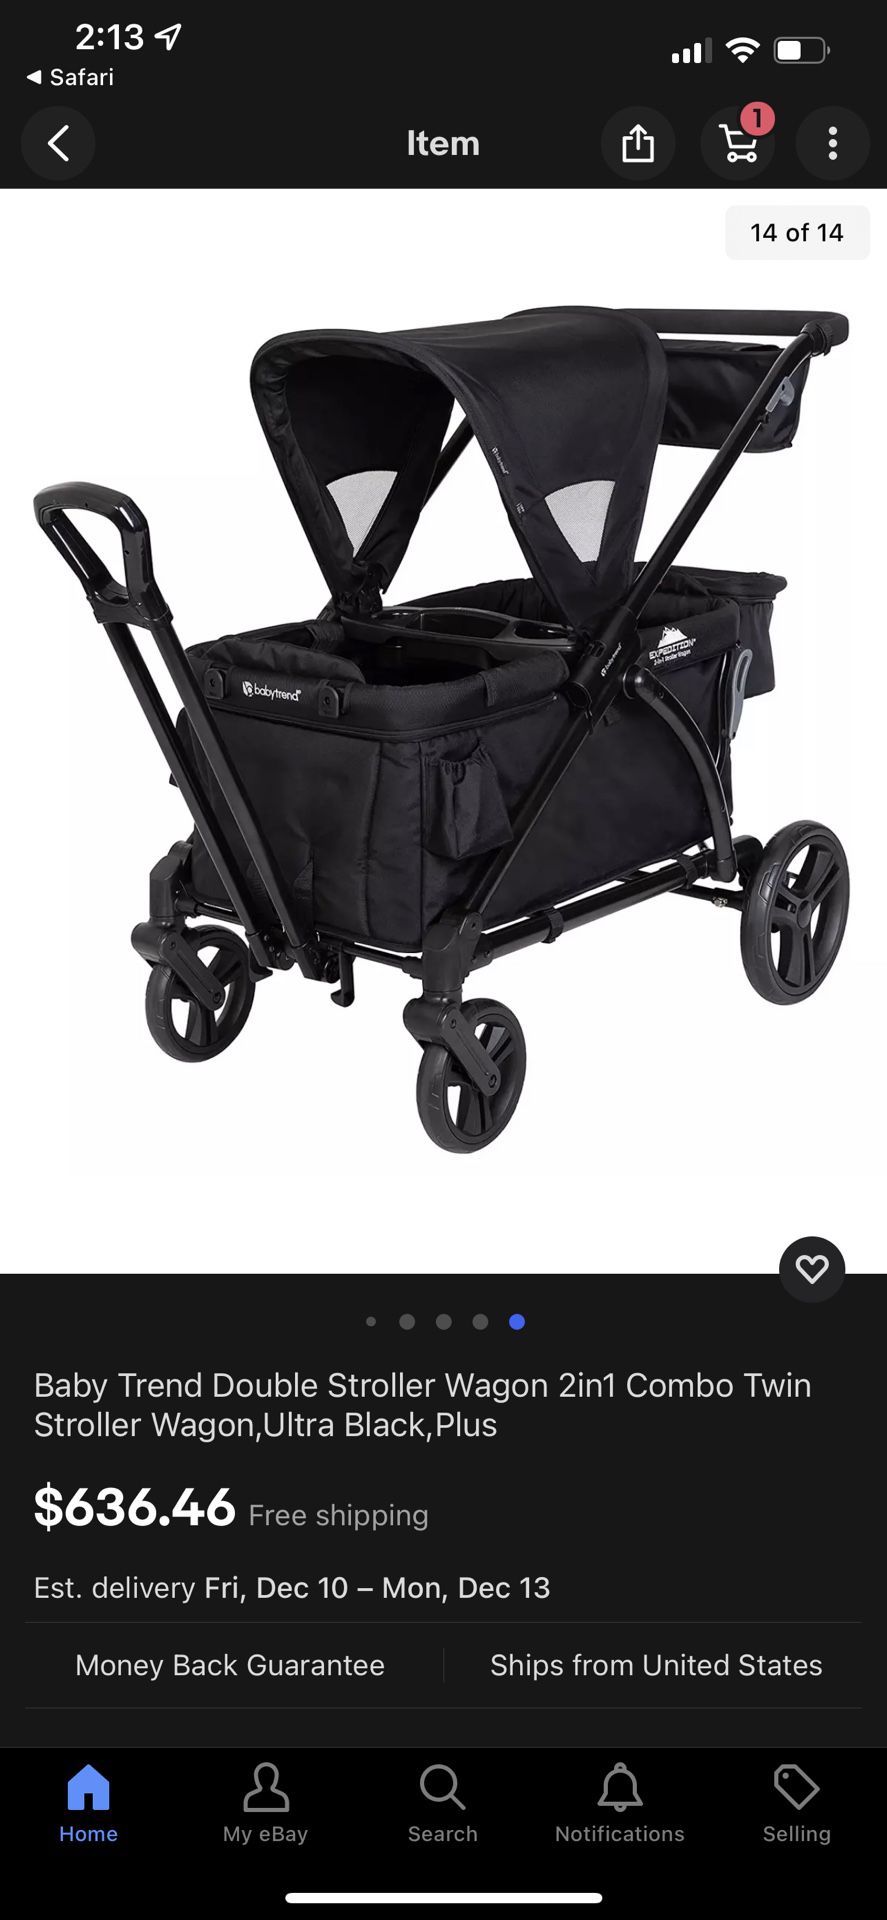 Baby Trend Double Stroller Wagon 